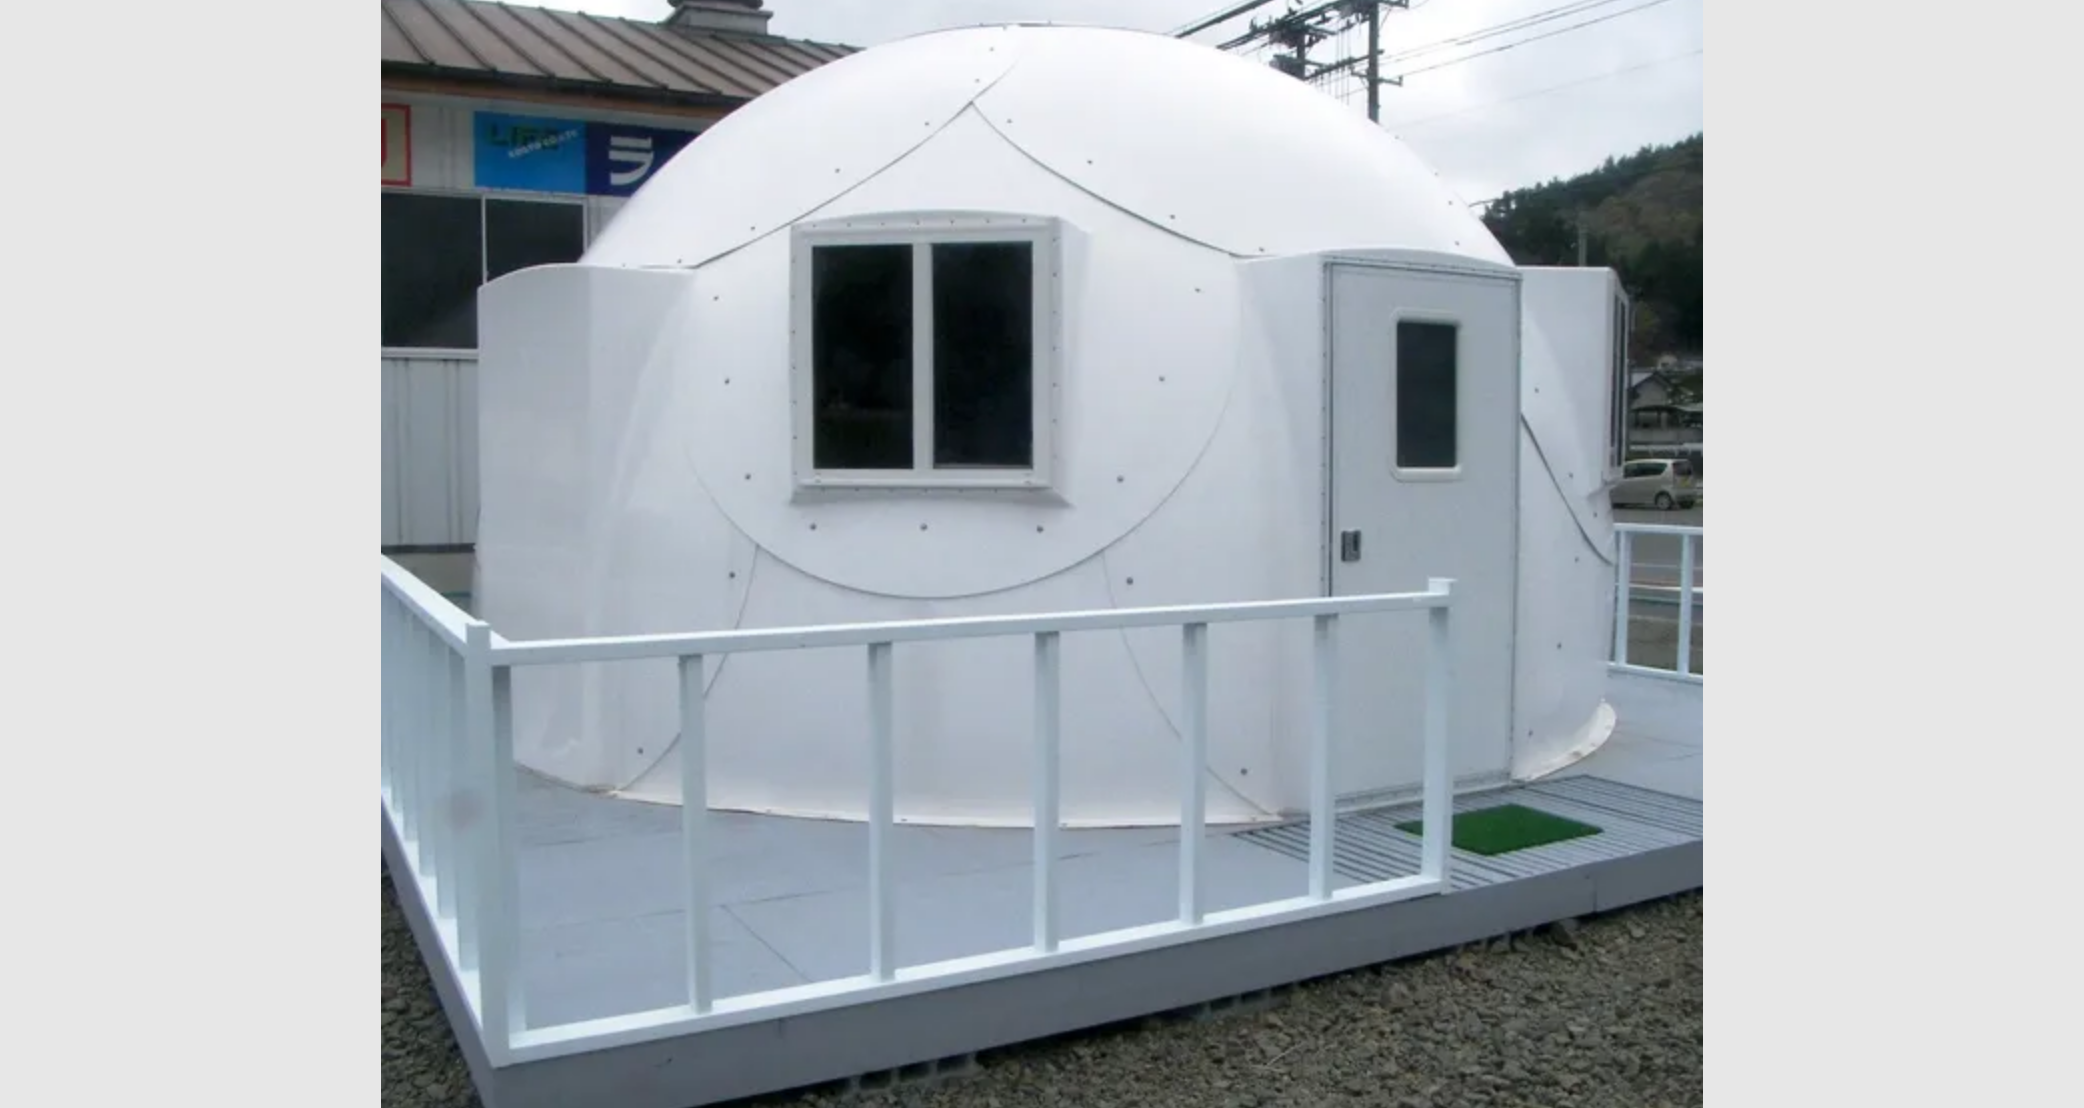 Church tackles Hawaii’s homeless problem with igloos from Alaska